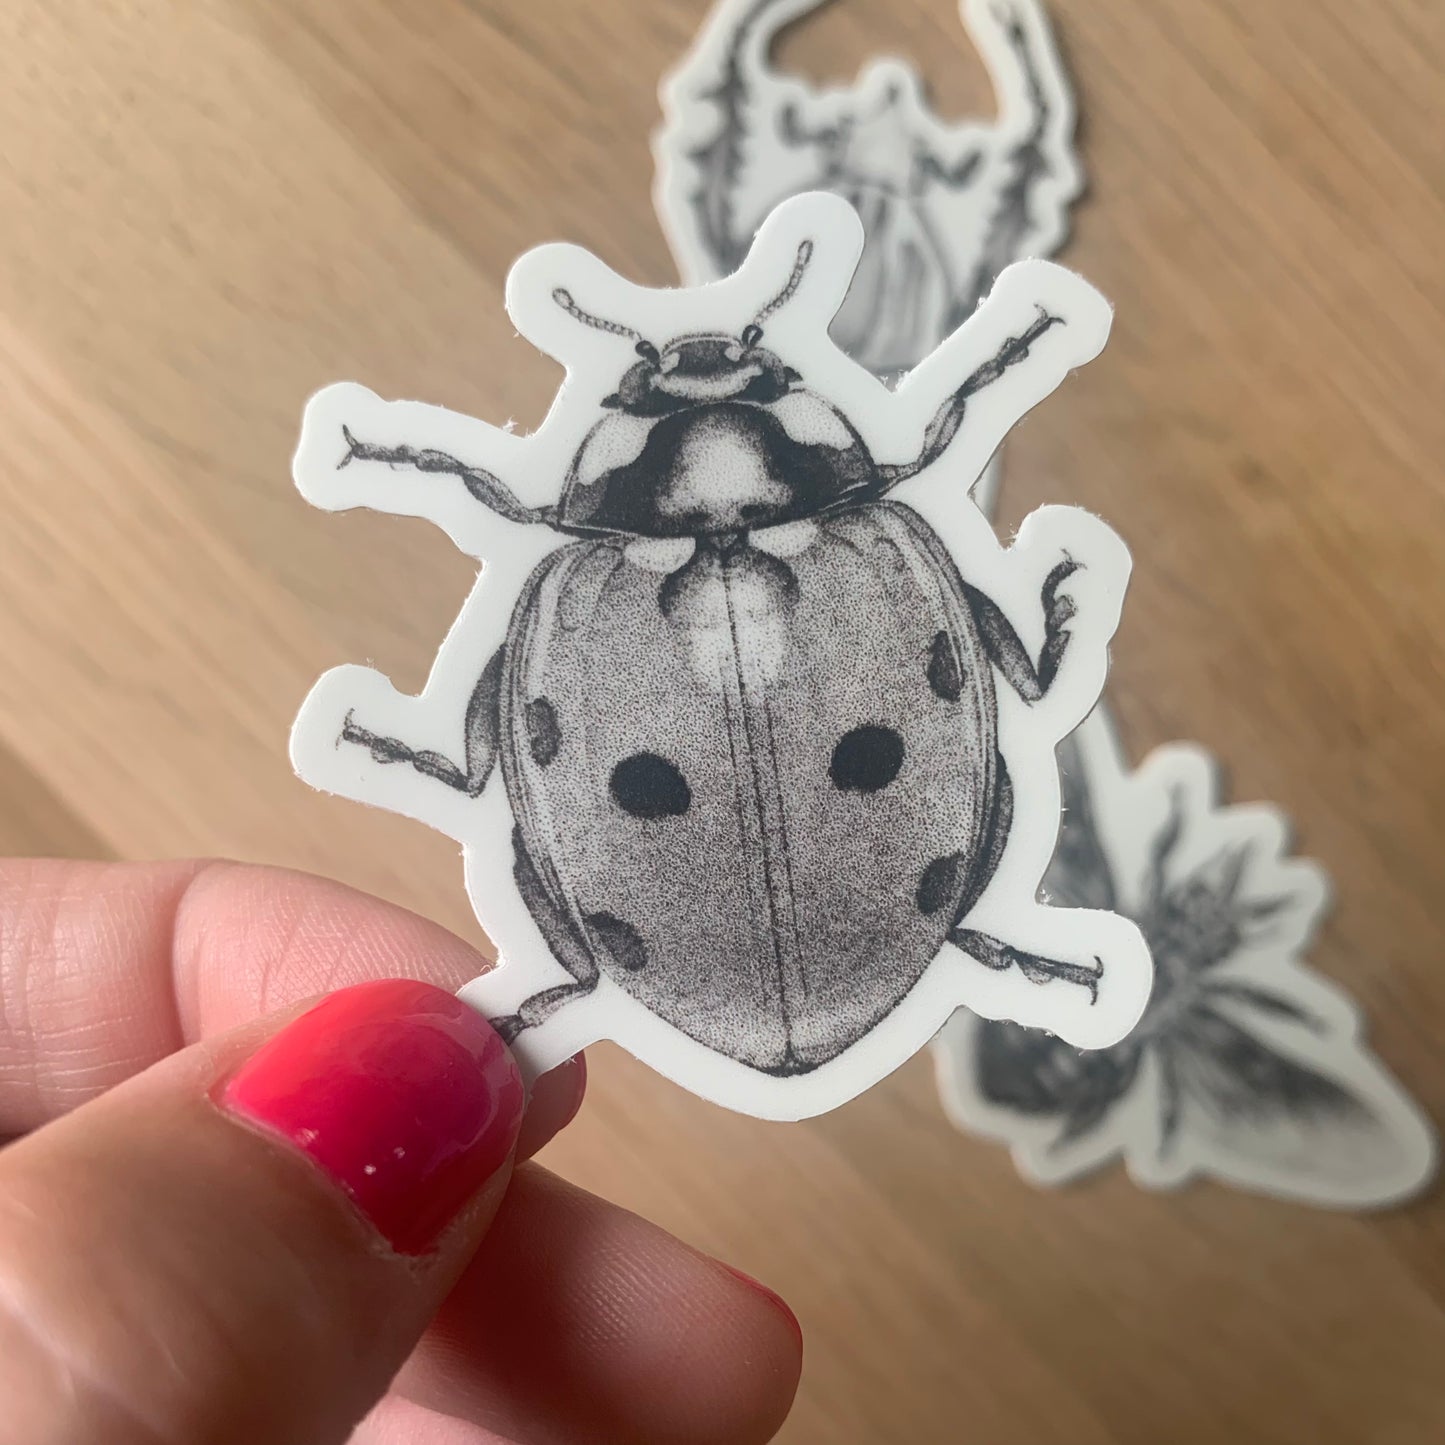 Insect Stickers